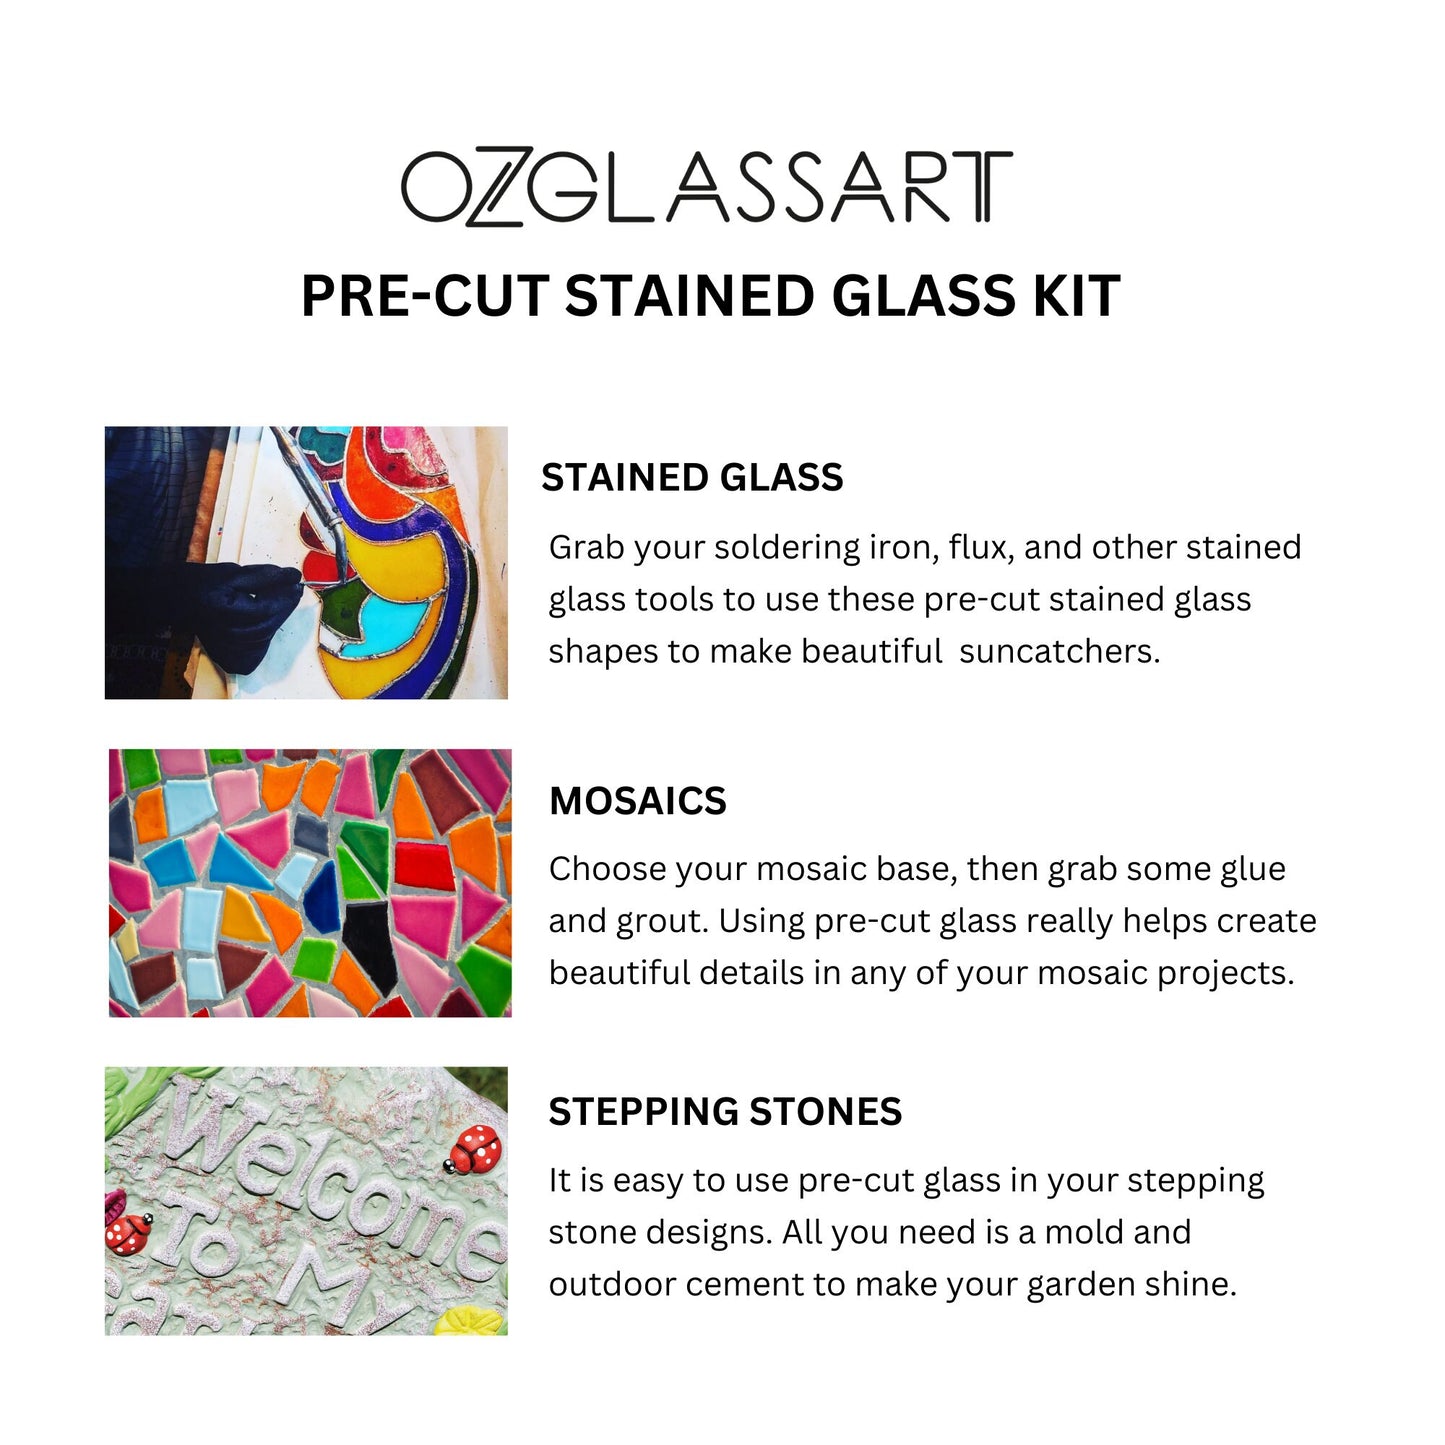 PreCut Daisy Stained Glass Kit - Stained Glass Daisy Flower Pre-Cut Kit, DIY